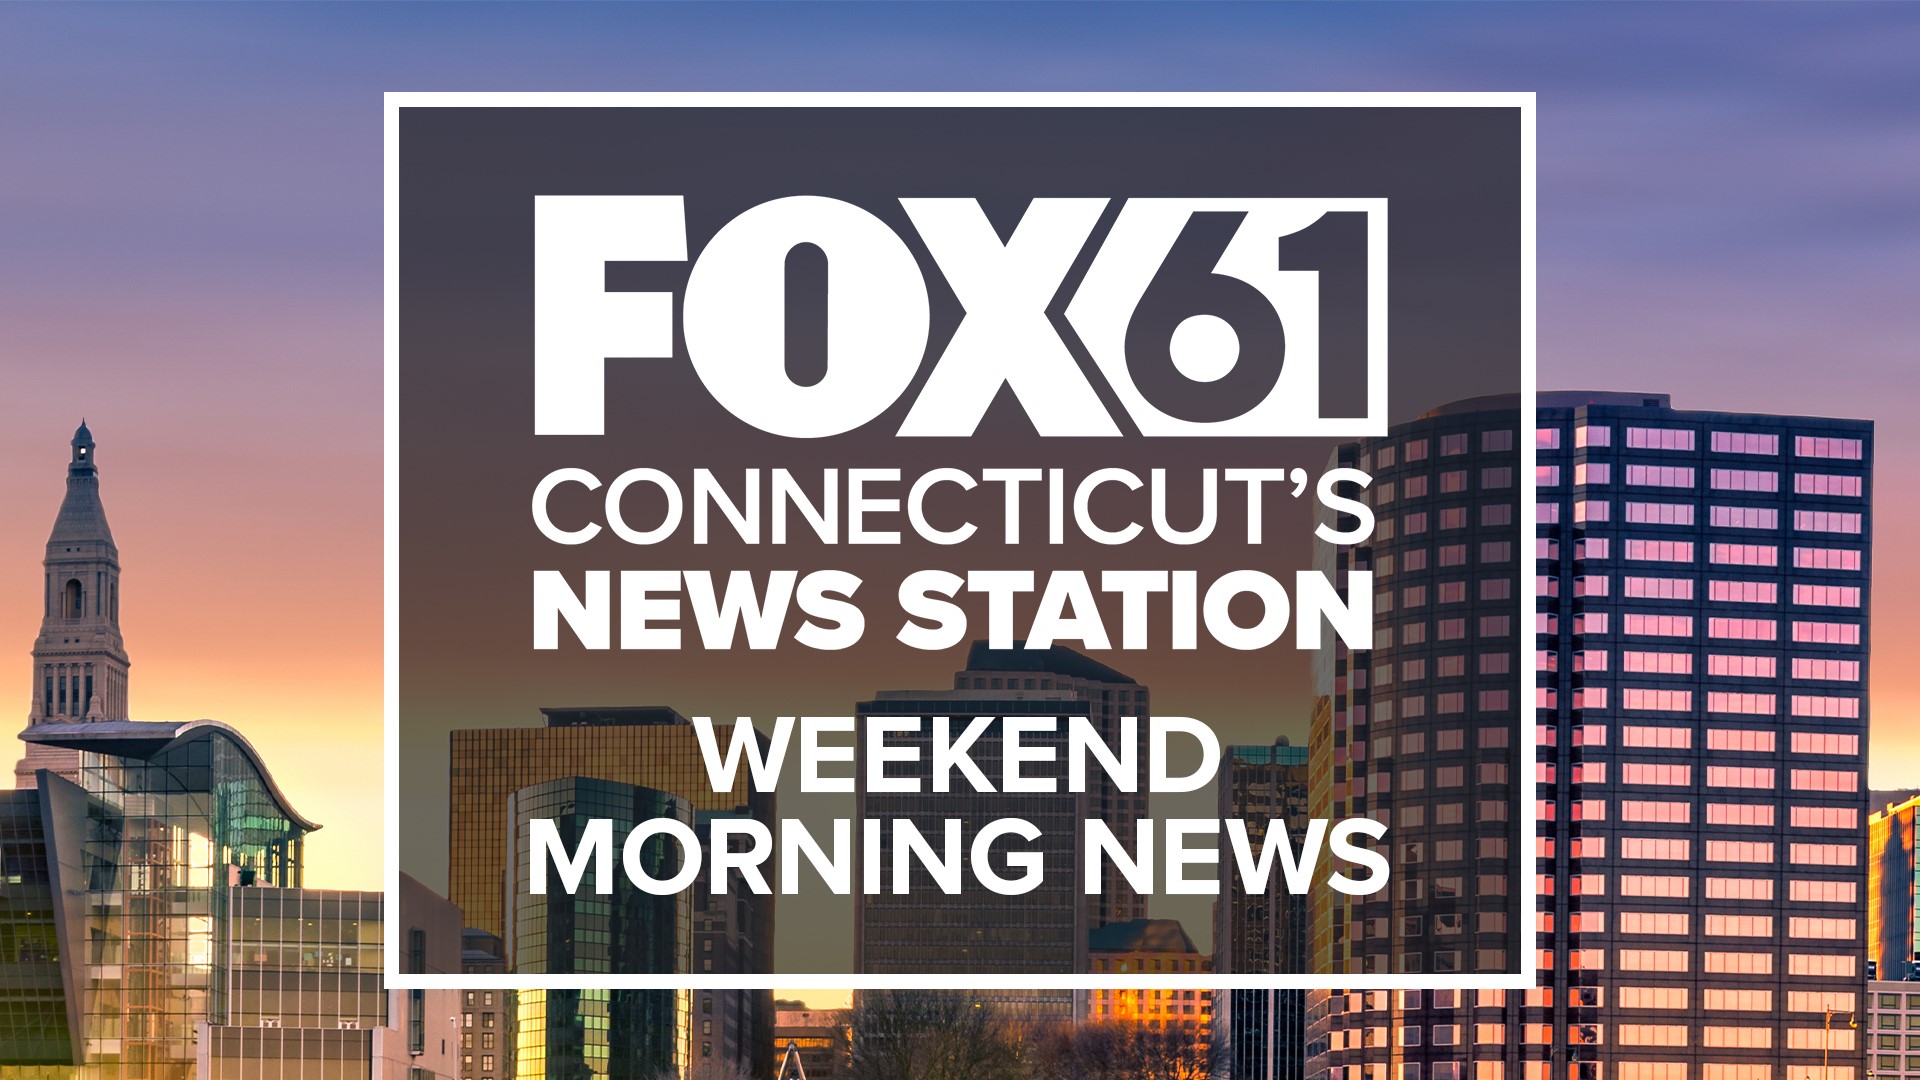 Overnight developments, breaking news, local weather and traffic, Angelo Bavaro provides unique community coverage from across the state every weekend morning.